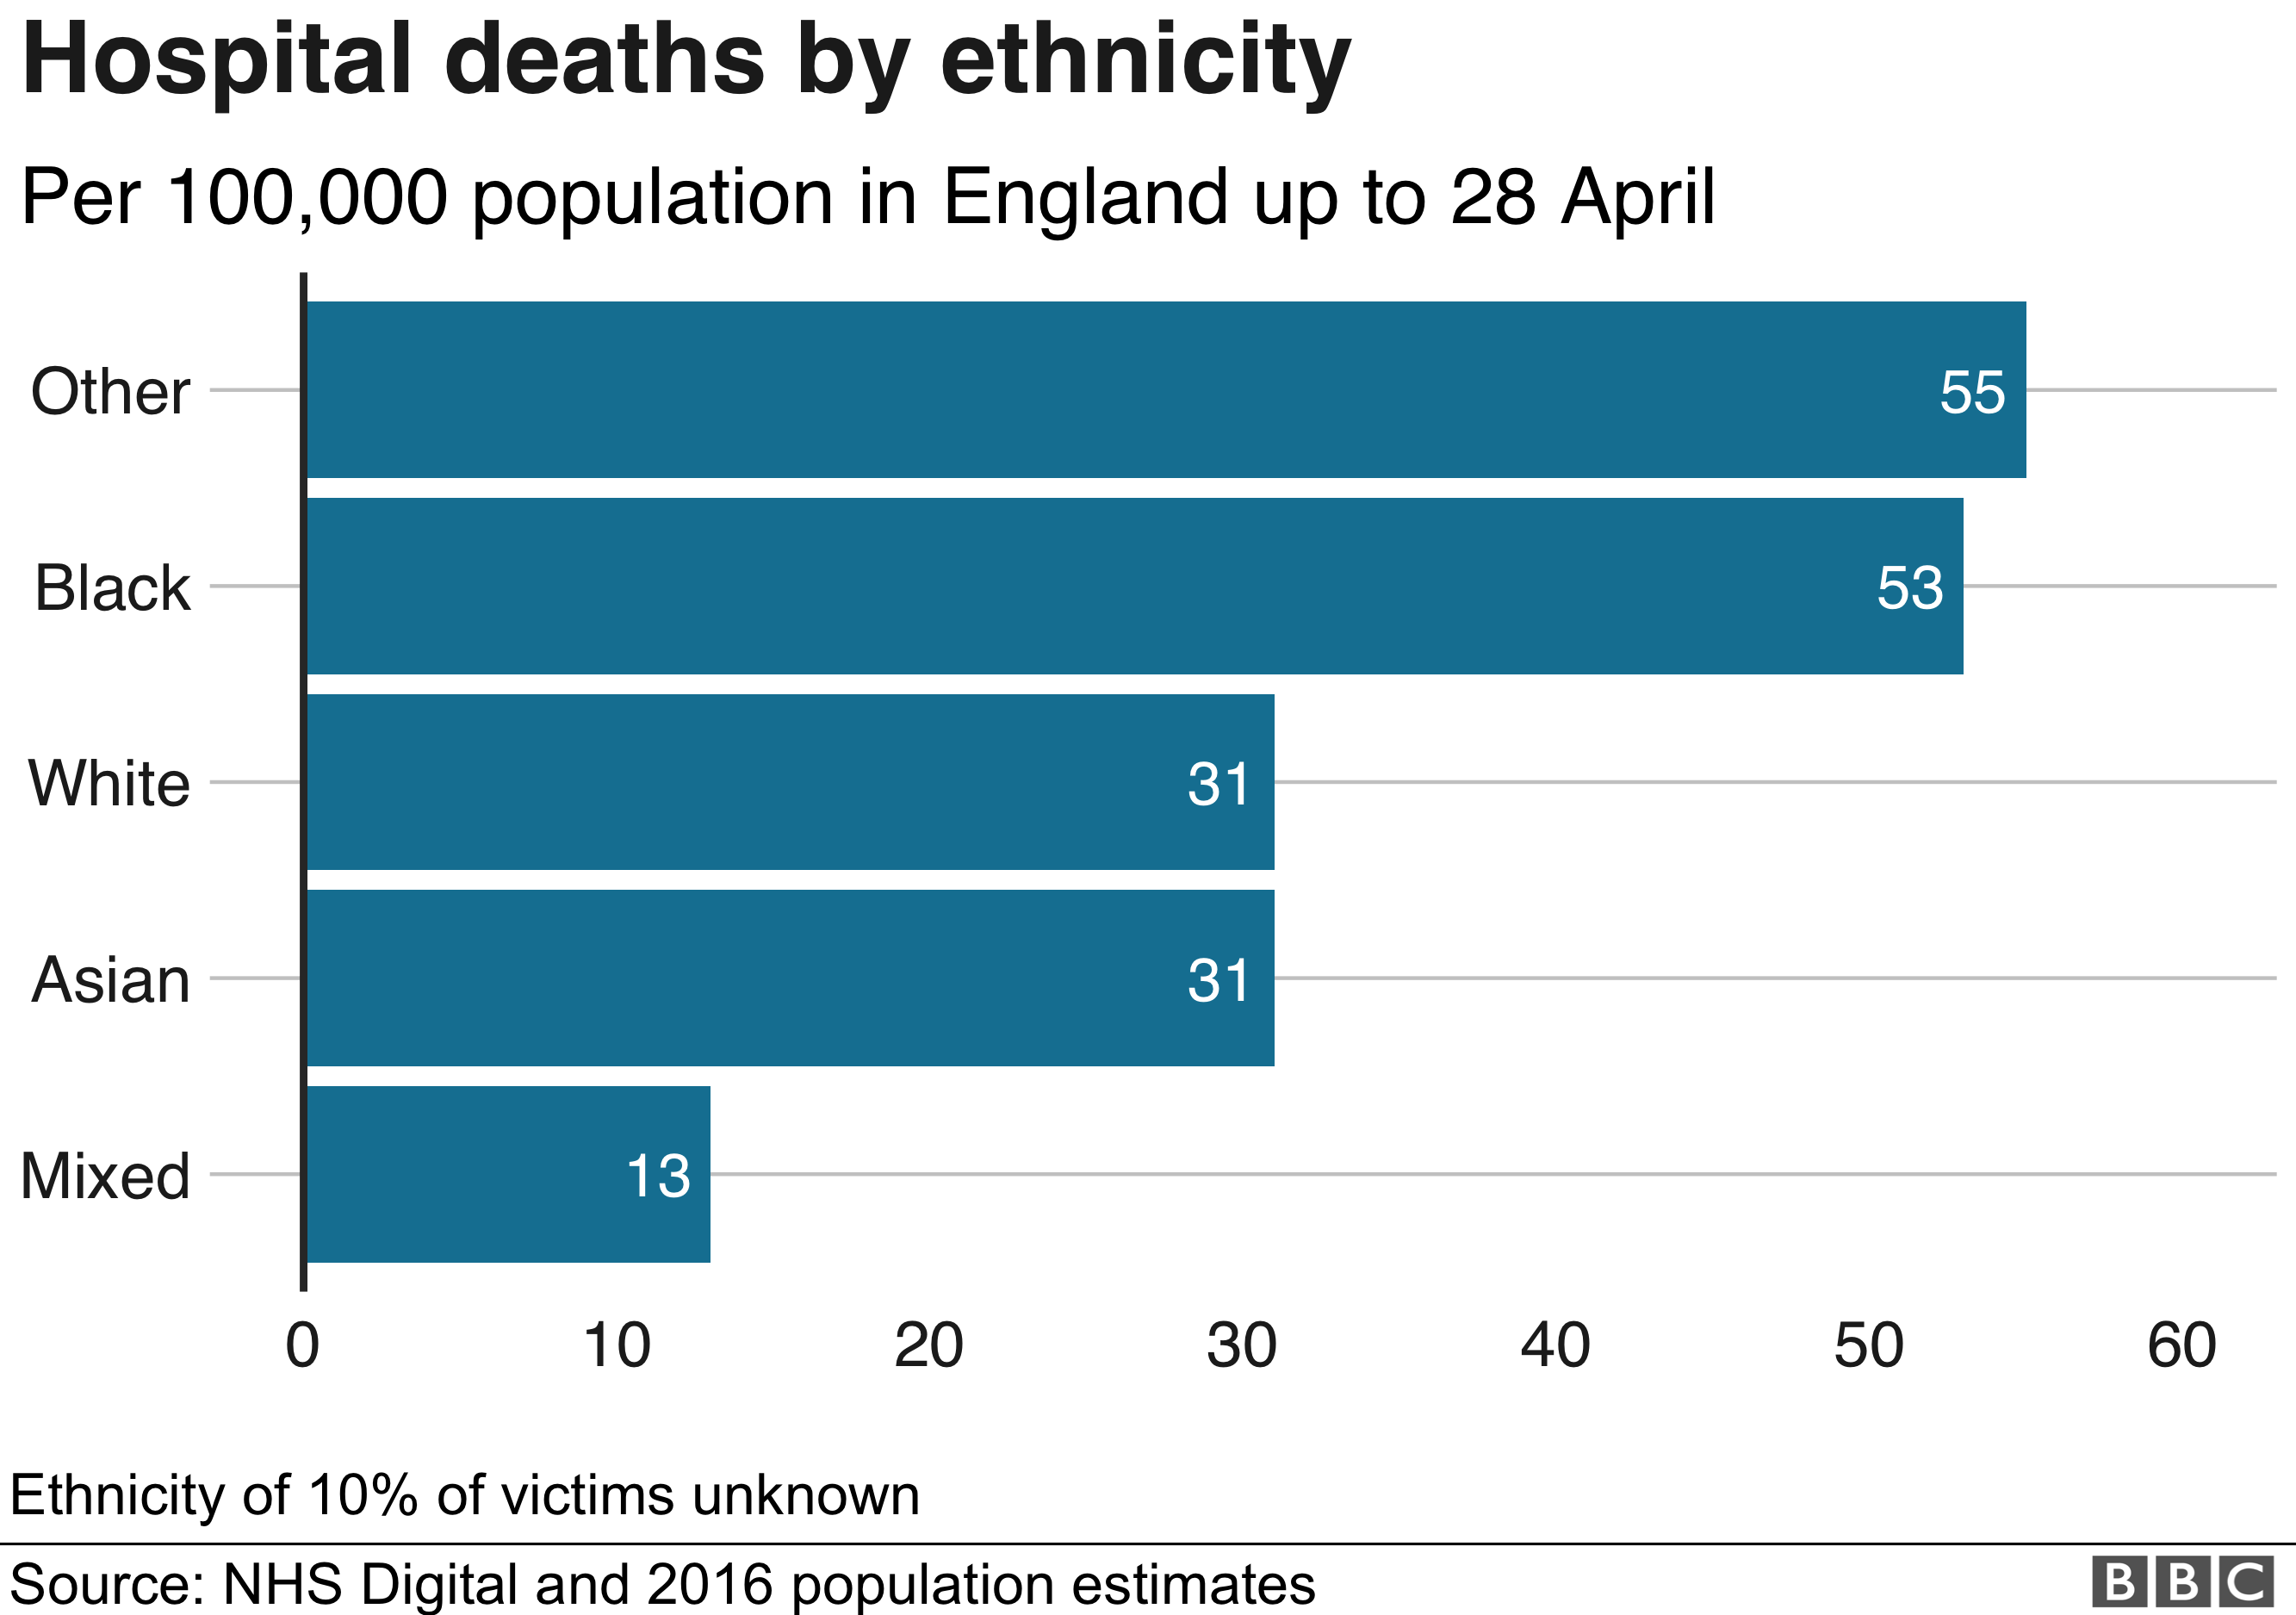 Chart showing deaths by ethnicity